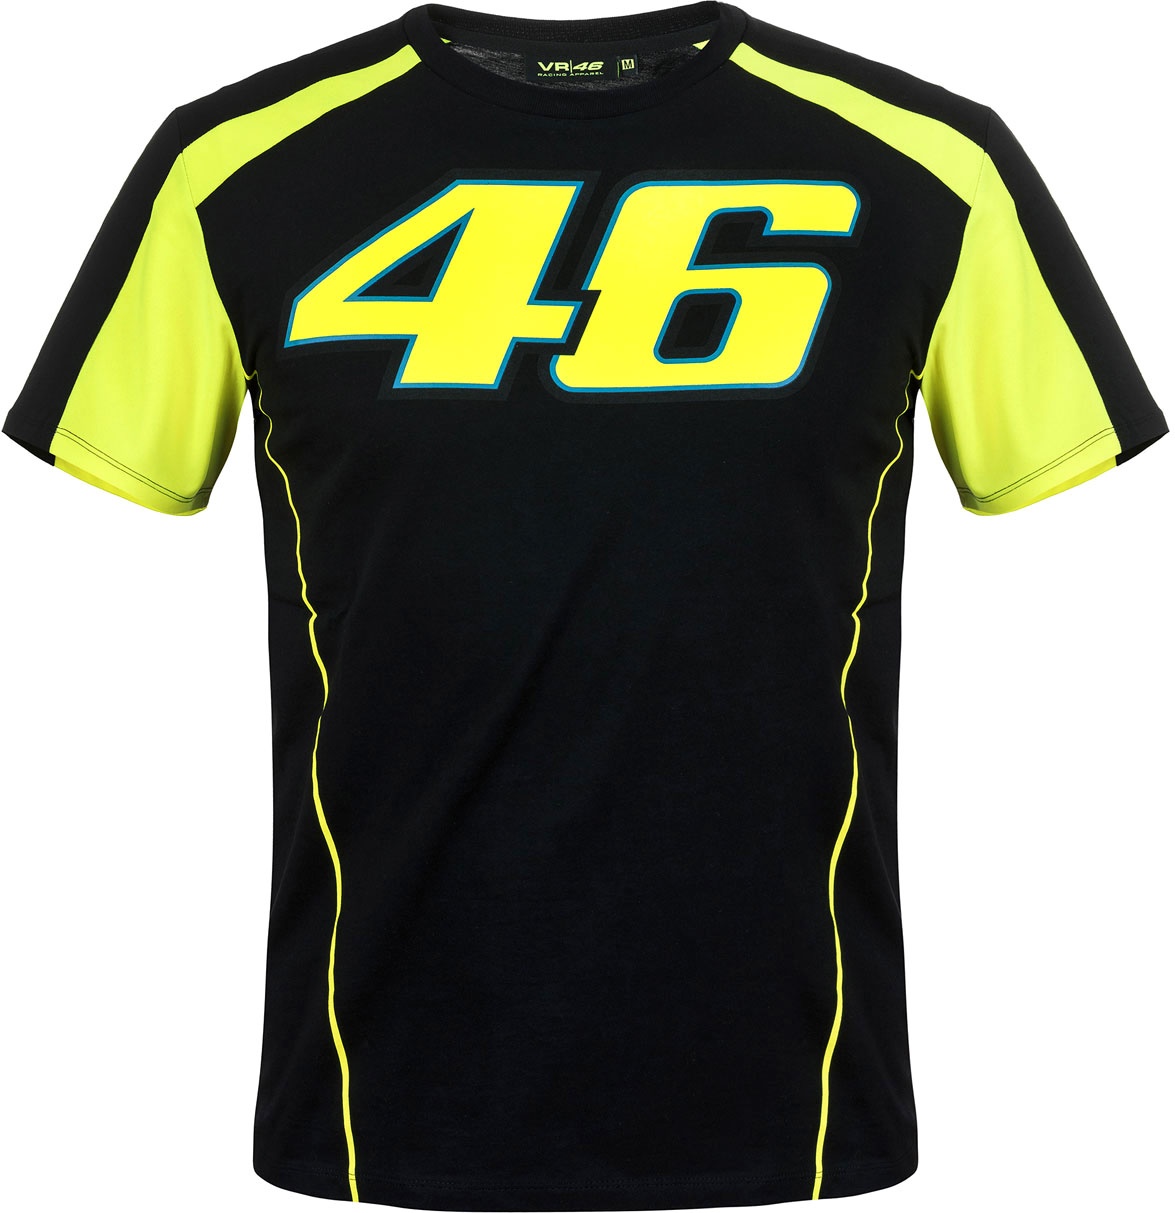 VR46 Racing Apparel Classic 46 The Doctor, t-shirt - Noir - S